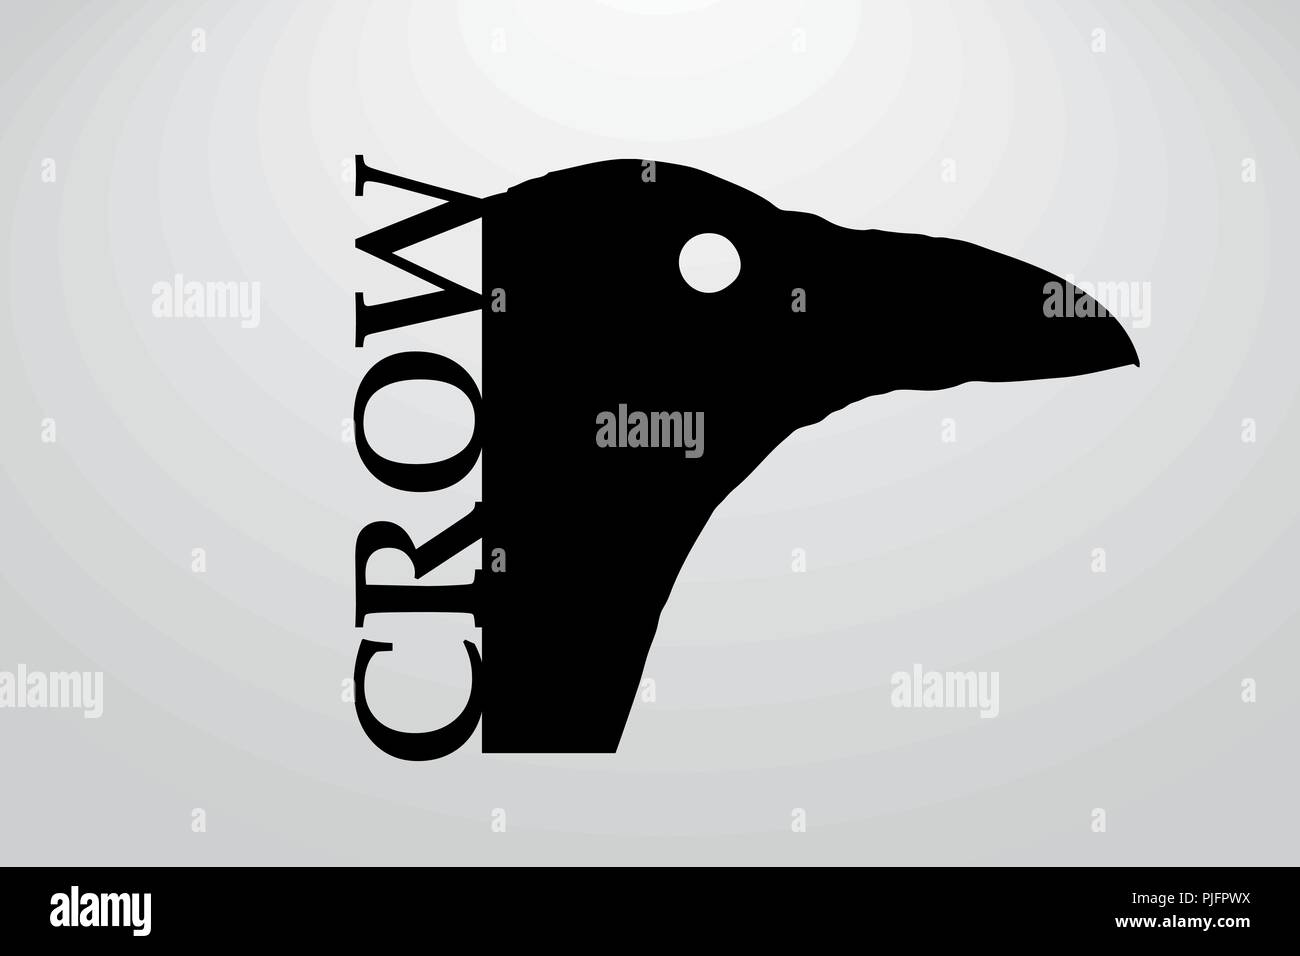 Silhouette of a crow. Background and text on a separate layer, color can be changed in one click. Stock Vector